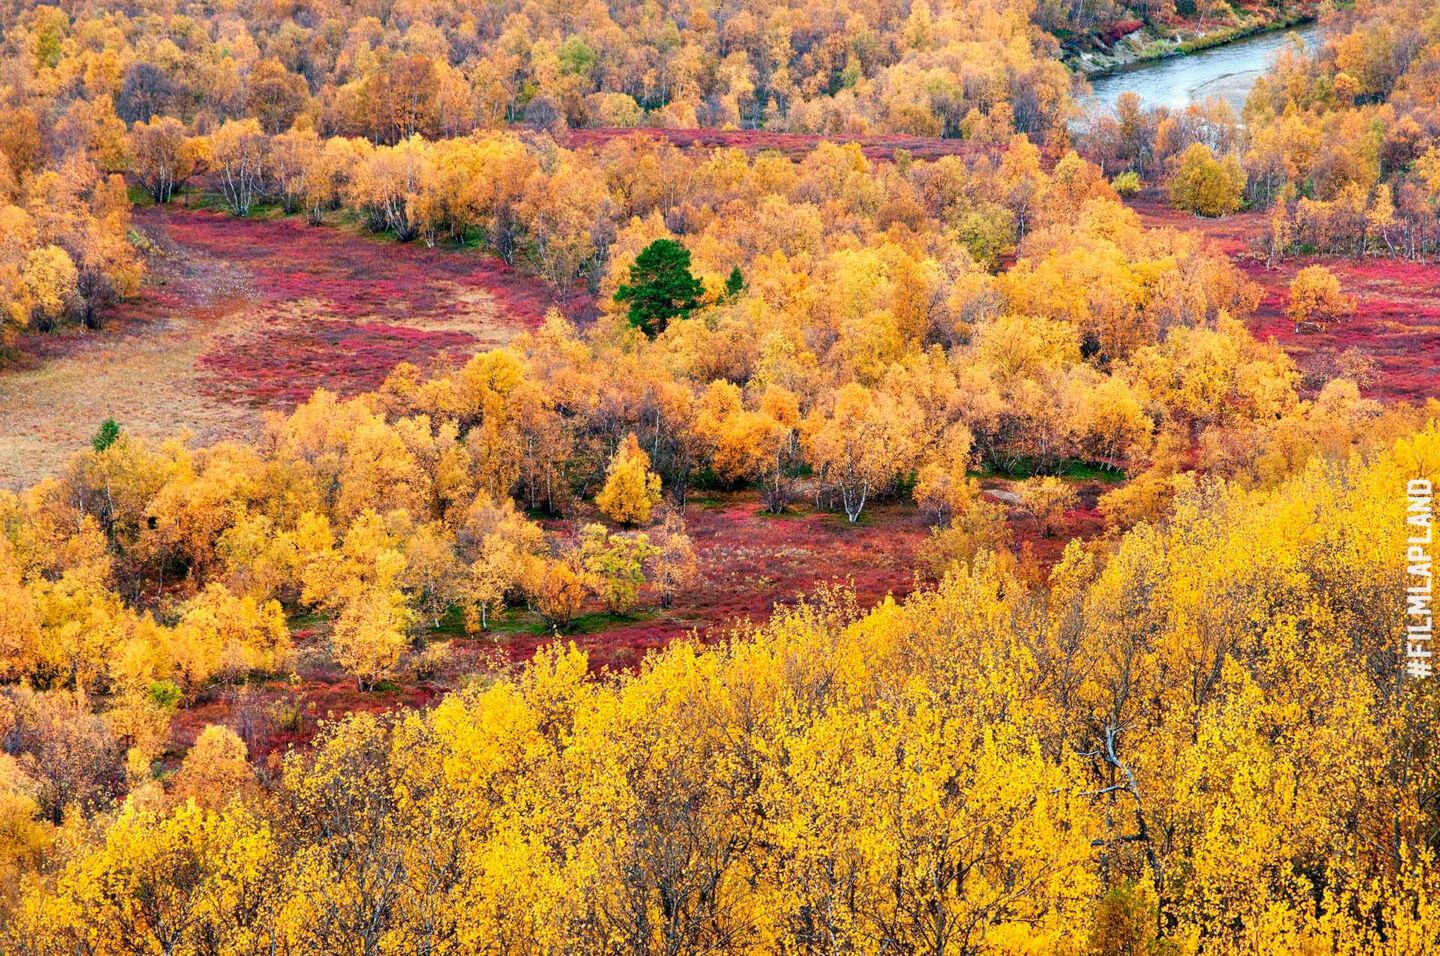 Autumn colors in Utsoki, a feature of filming in Finnish Lapland locations